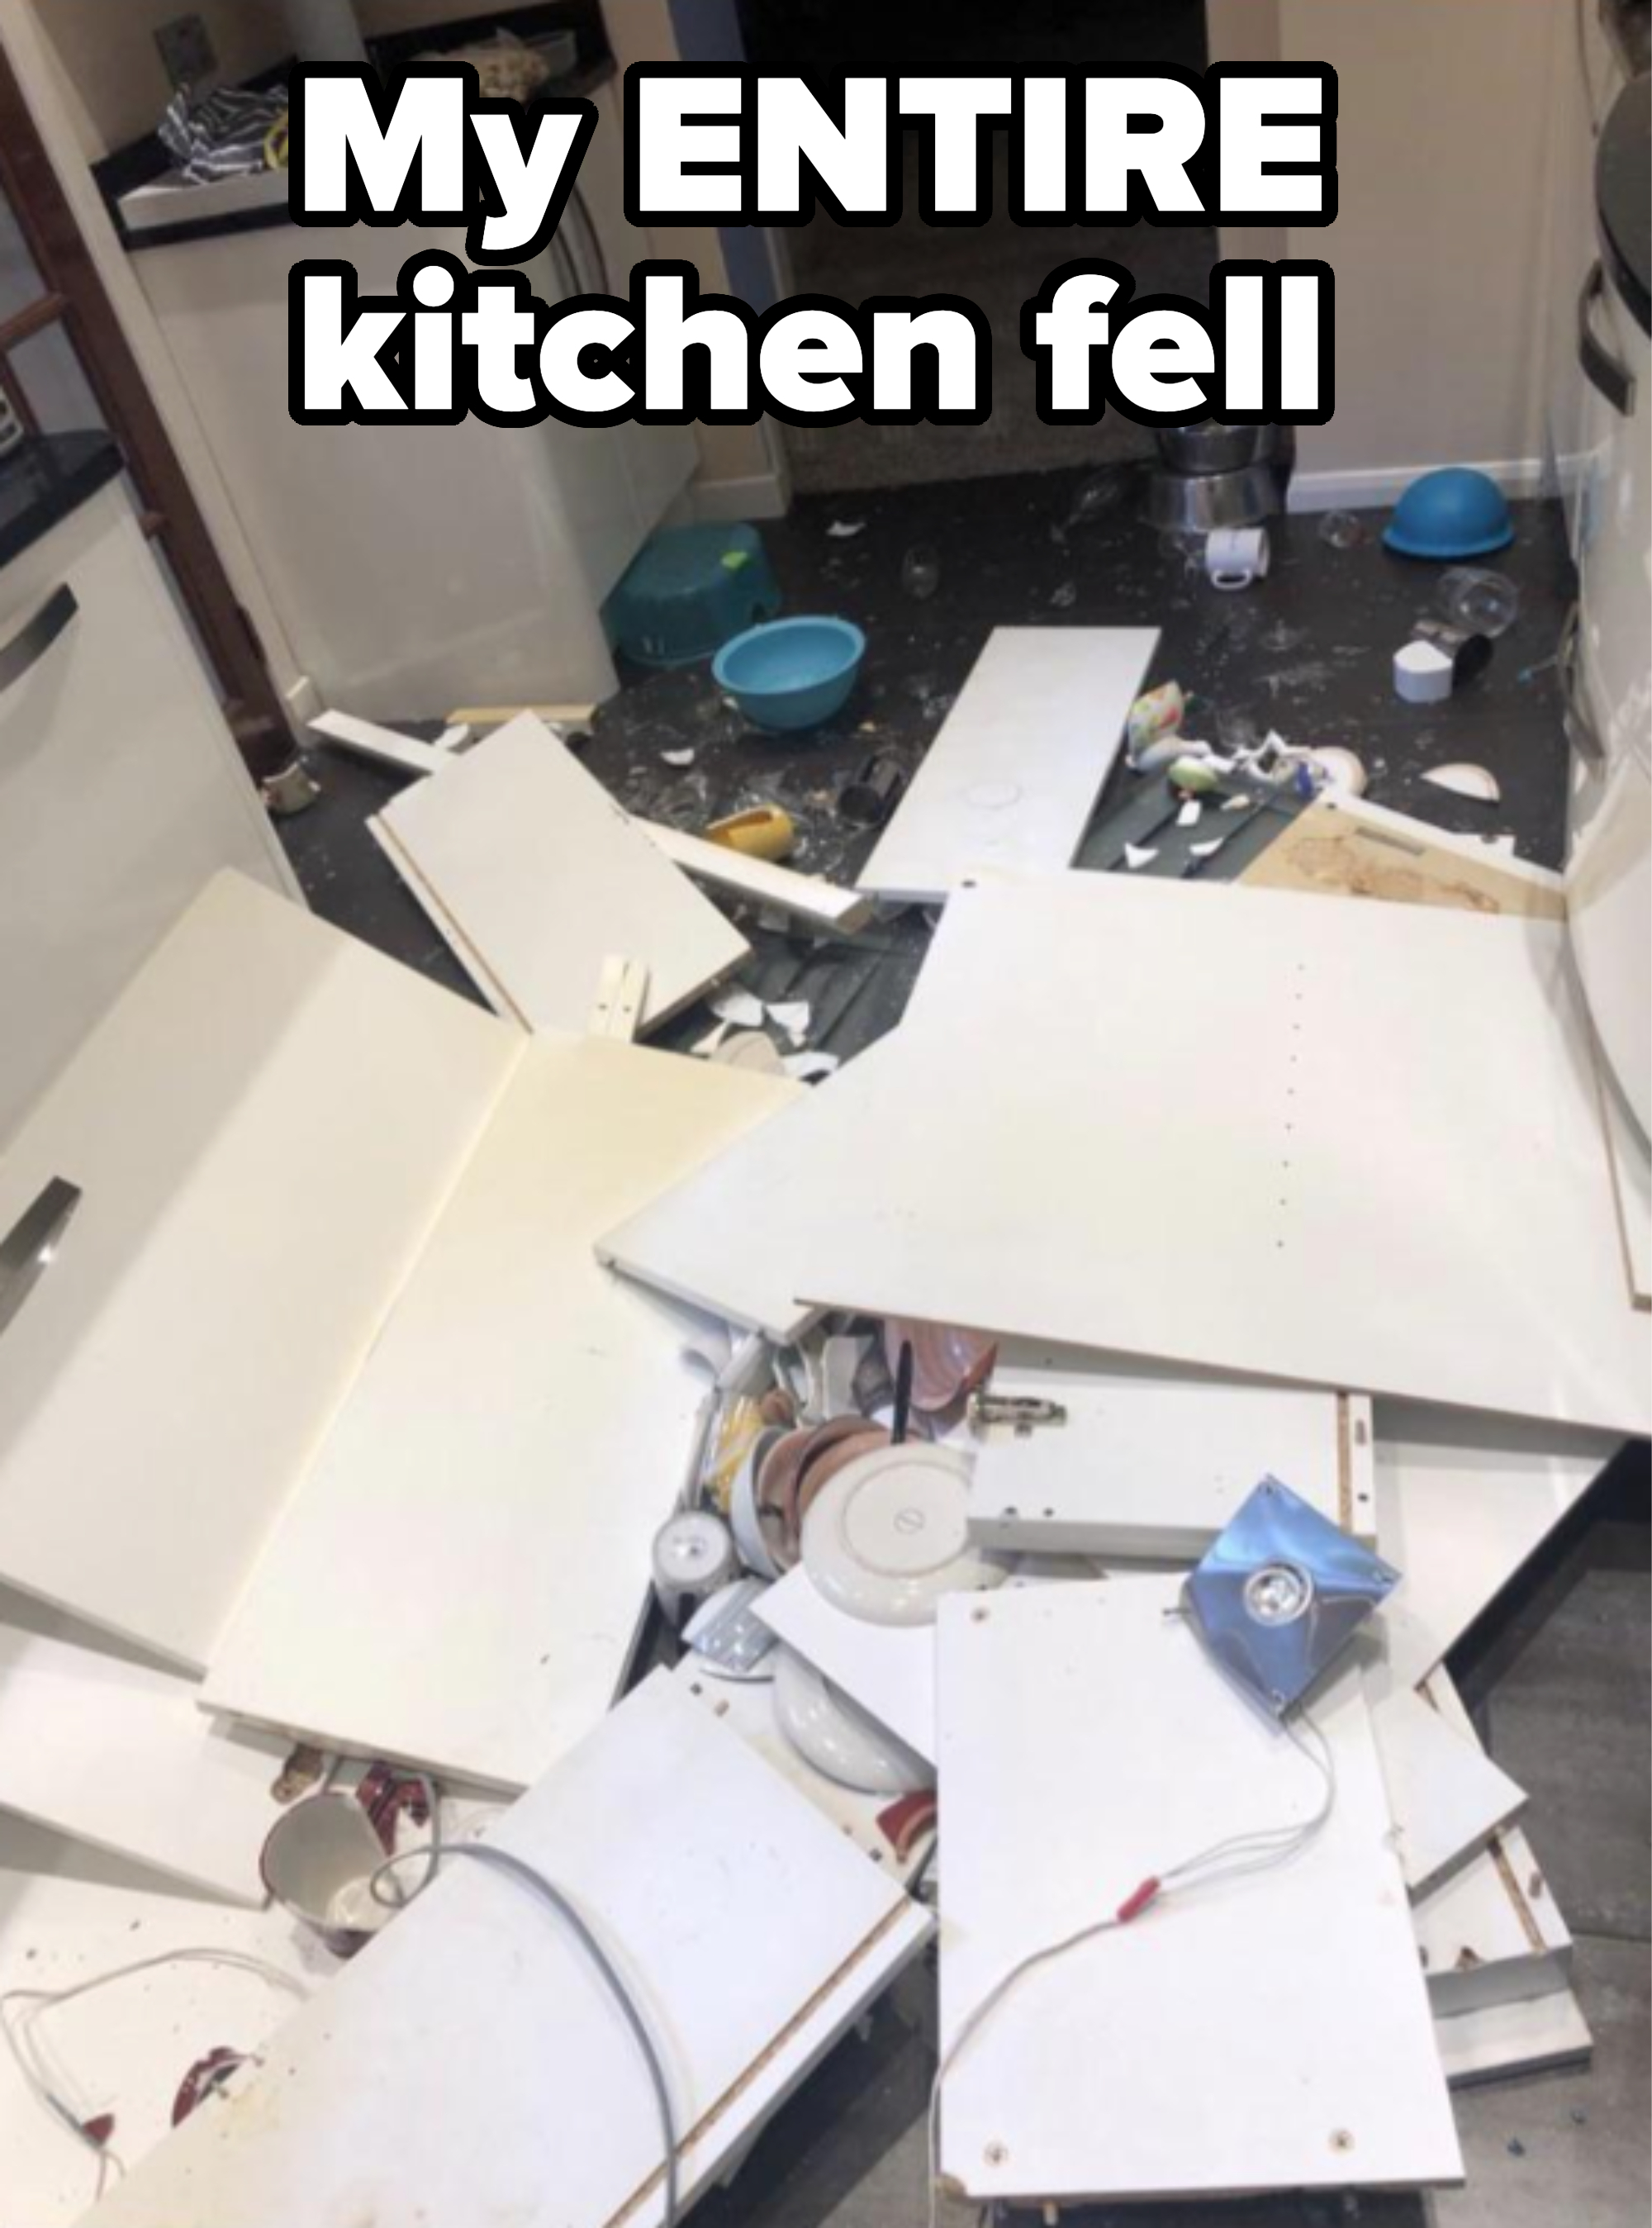 &quot;My ENTIRE kitchen fell&quot; with the floor covered with broken appliances